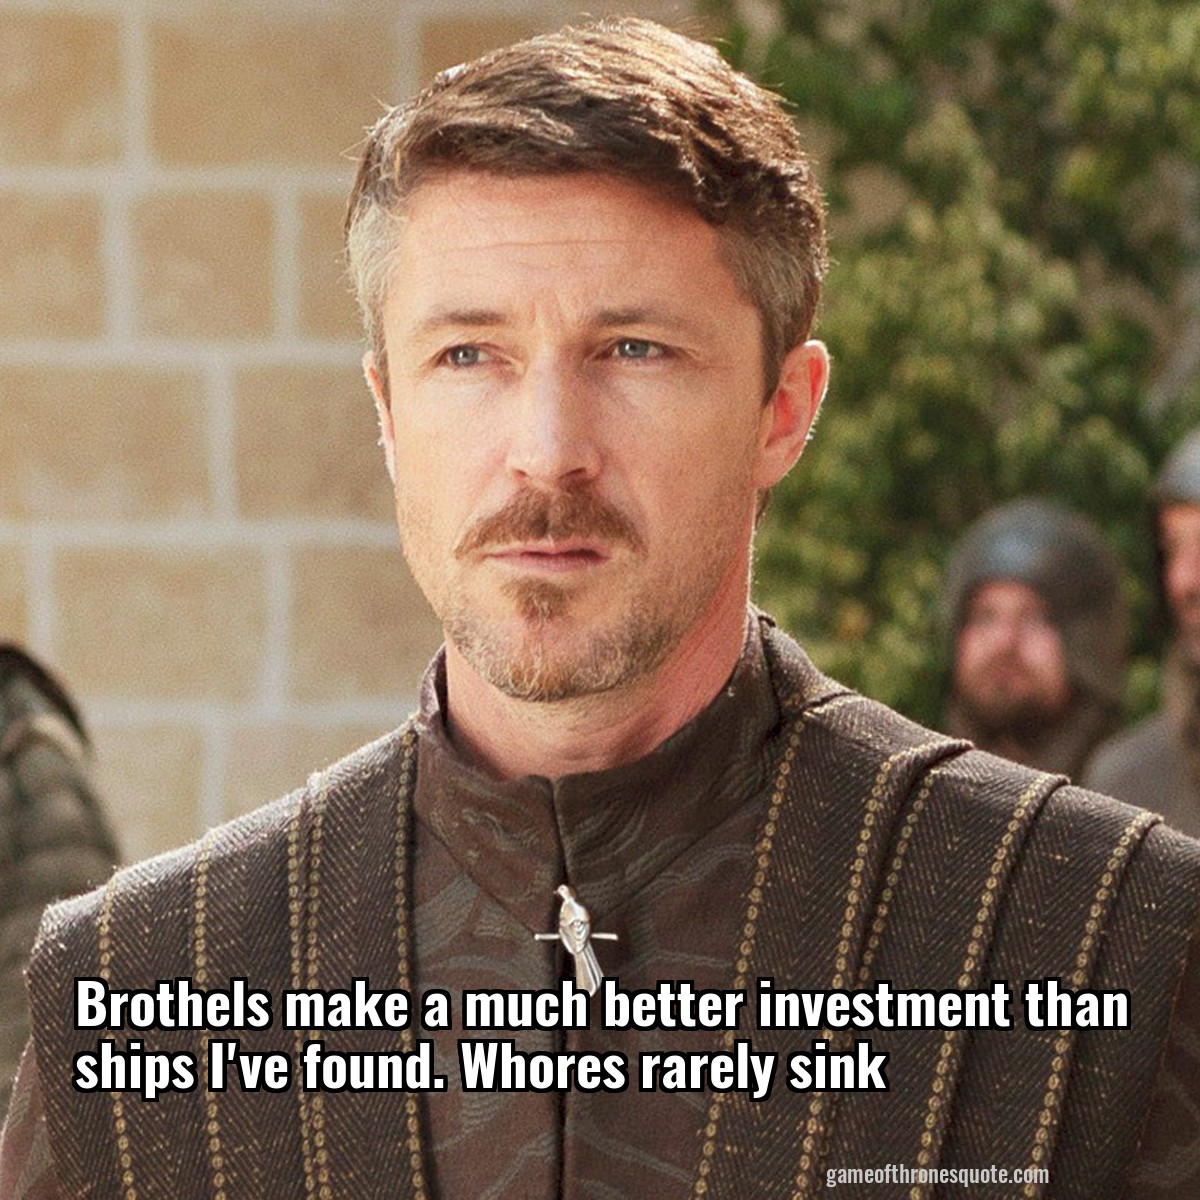 Brothels make a much better investment than ships I've found. Whores rarely sink